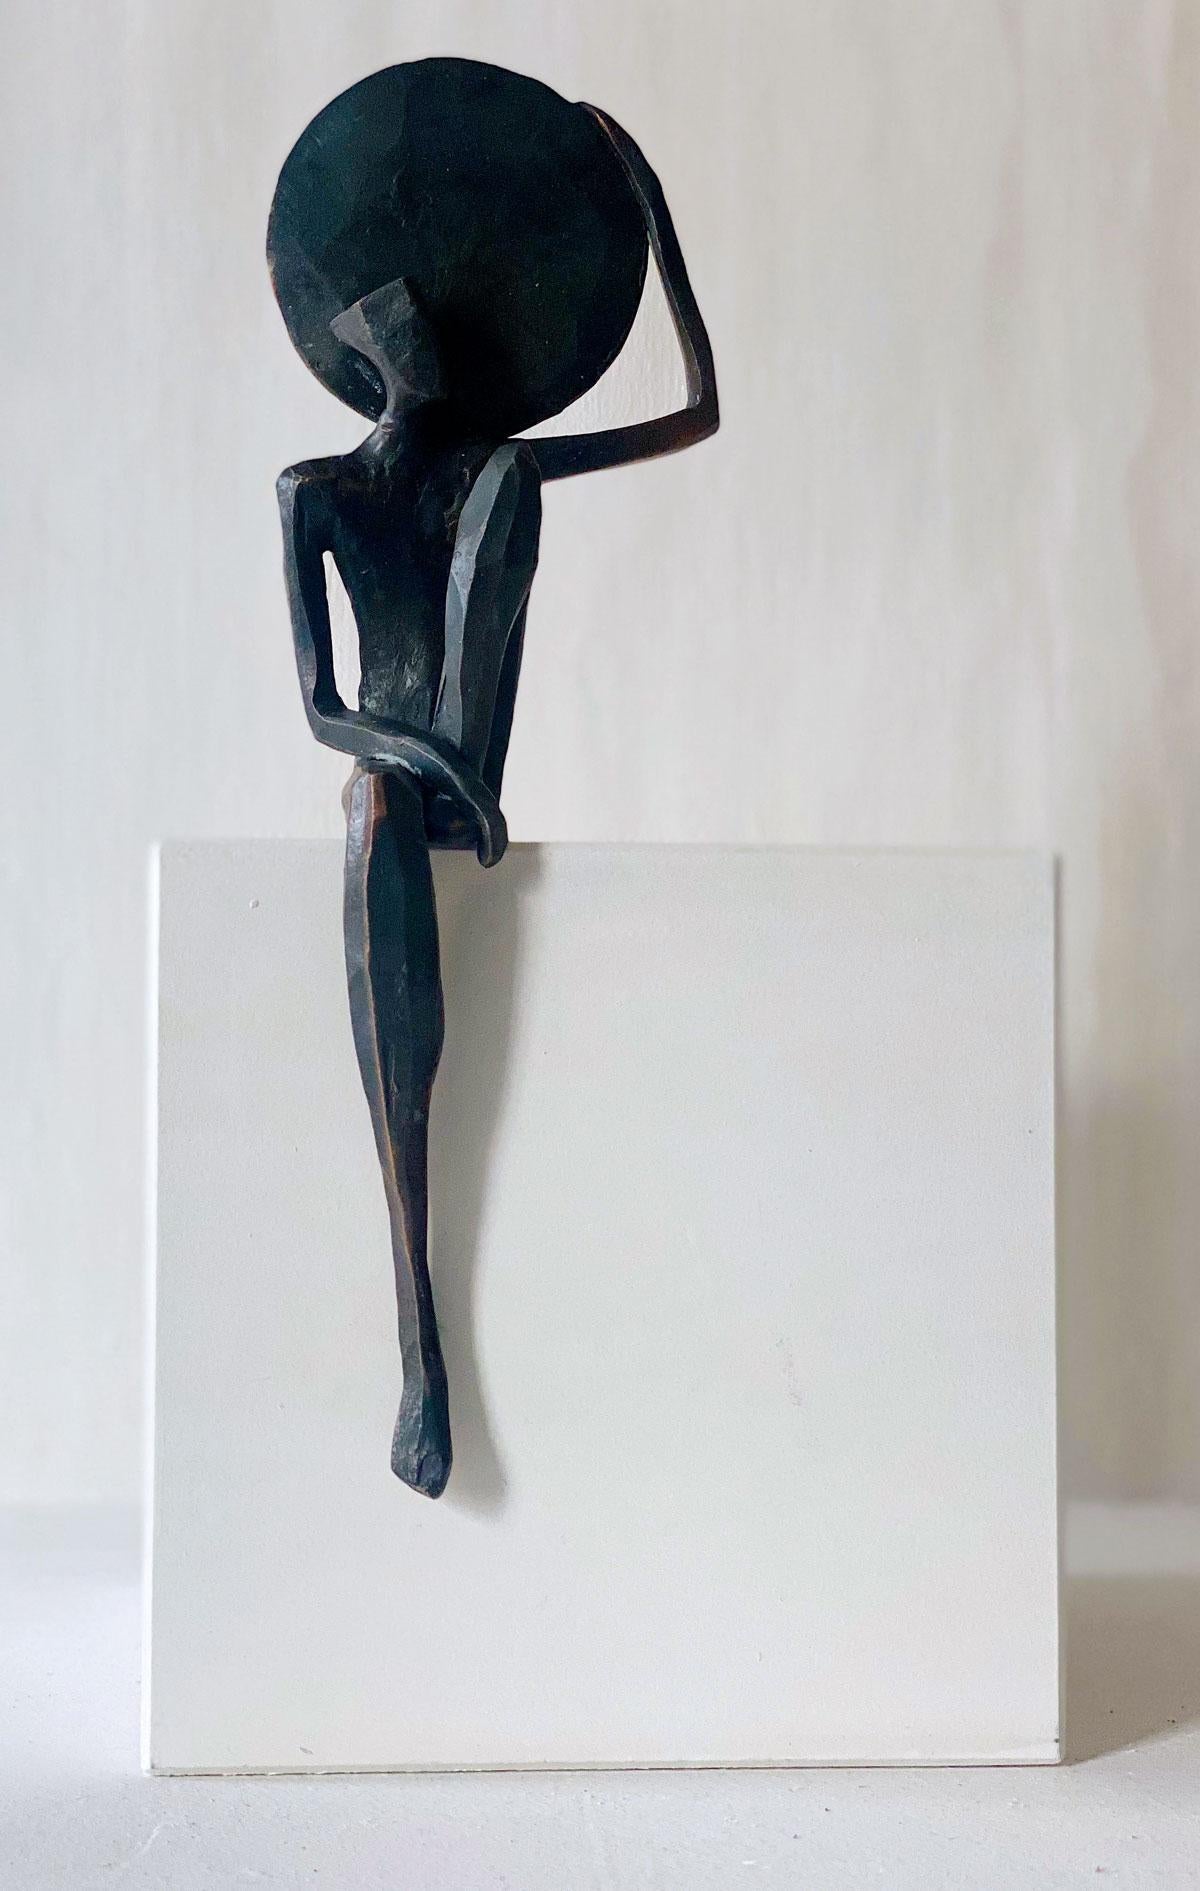 Apollon IV is an elegant figurative bronze sculpture by Nando Kallweit.

Modelled on modern youthful postures but with a nod to the importance of heritage through the stylised Egyptian-influenced head. A lovely piece on its own or with a group of